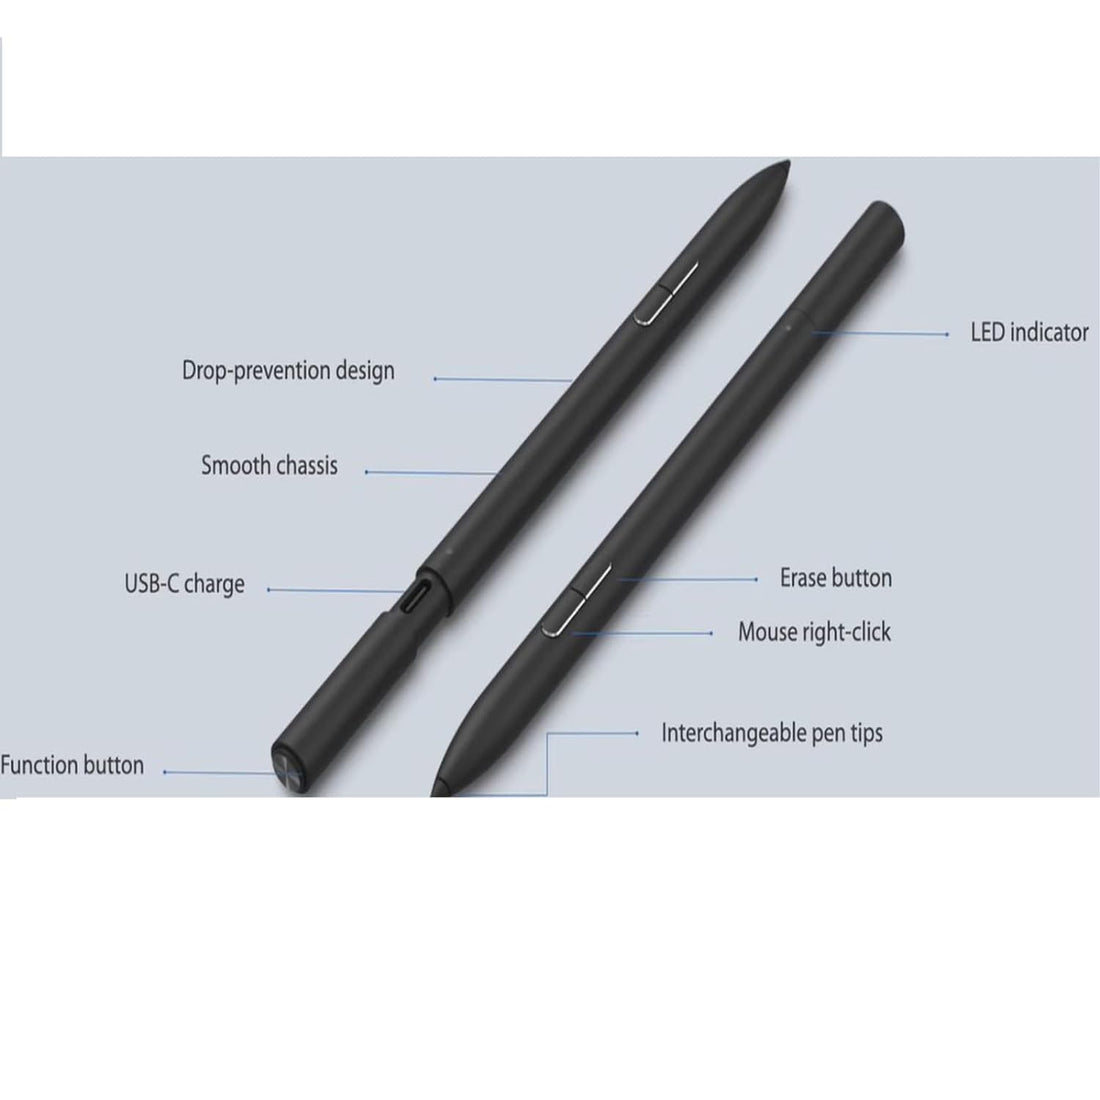 Stylus Digital Pen 2.0 for Asus SA203H Stylus Compatible with Asus ZenBook and VivoBook Slate, Black, Pen Only